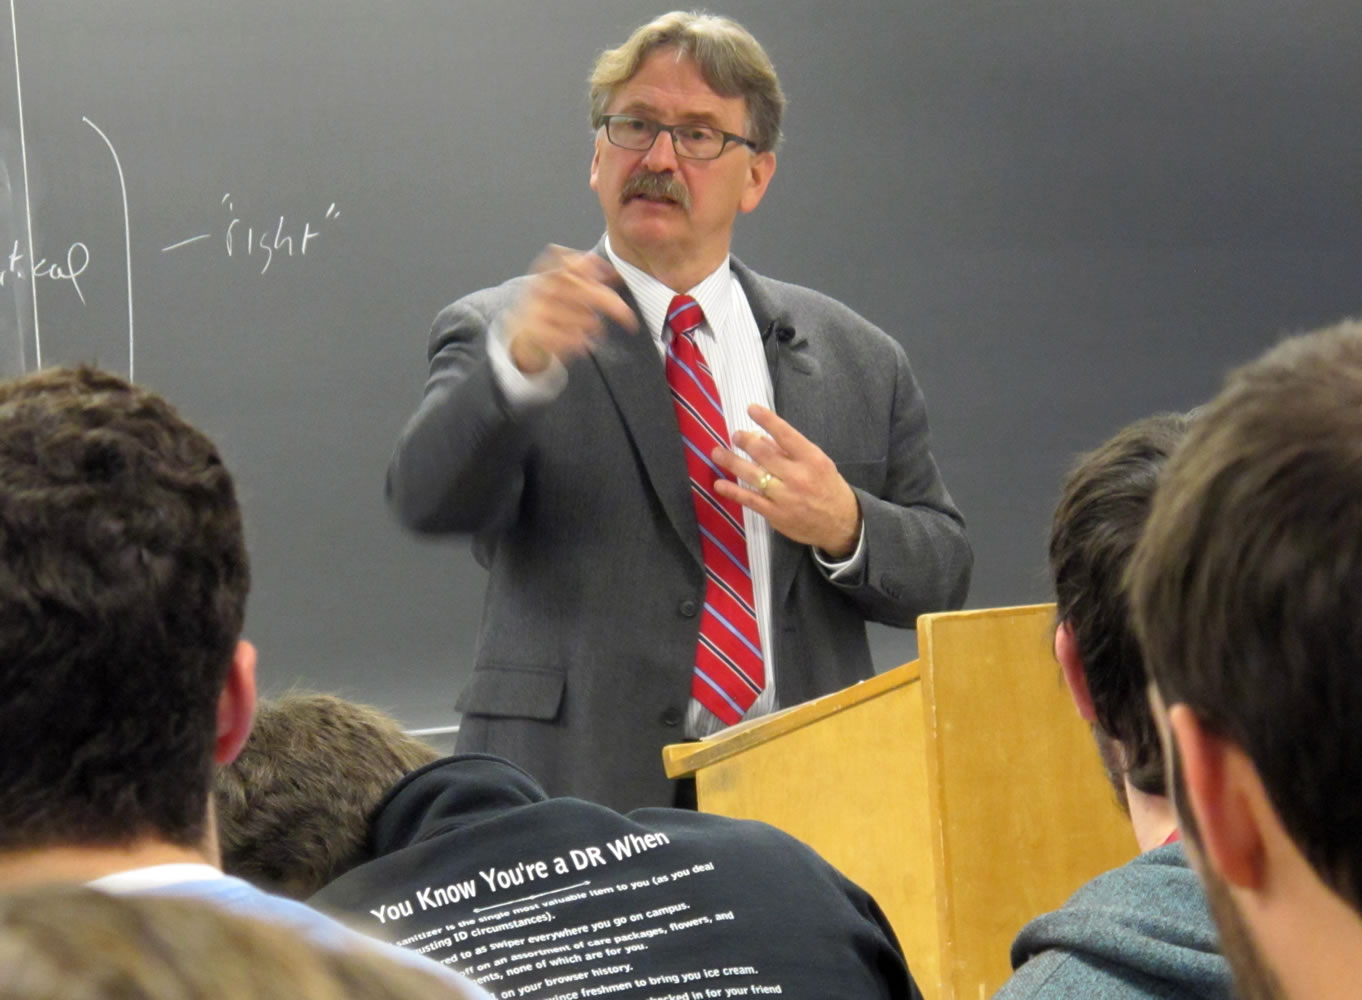 Marquette University professor Tim Machan teaches a class on J.R.R. Tolkien that focuses on all of his books, books that influenced Tolkien and other tidbits about the writer. When &quot;The Hobbit&quot; movie opened Dec. 14, the 32 students in the class were nearly experts on J.R.R.